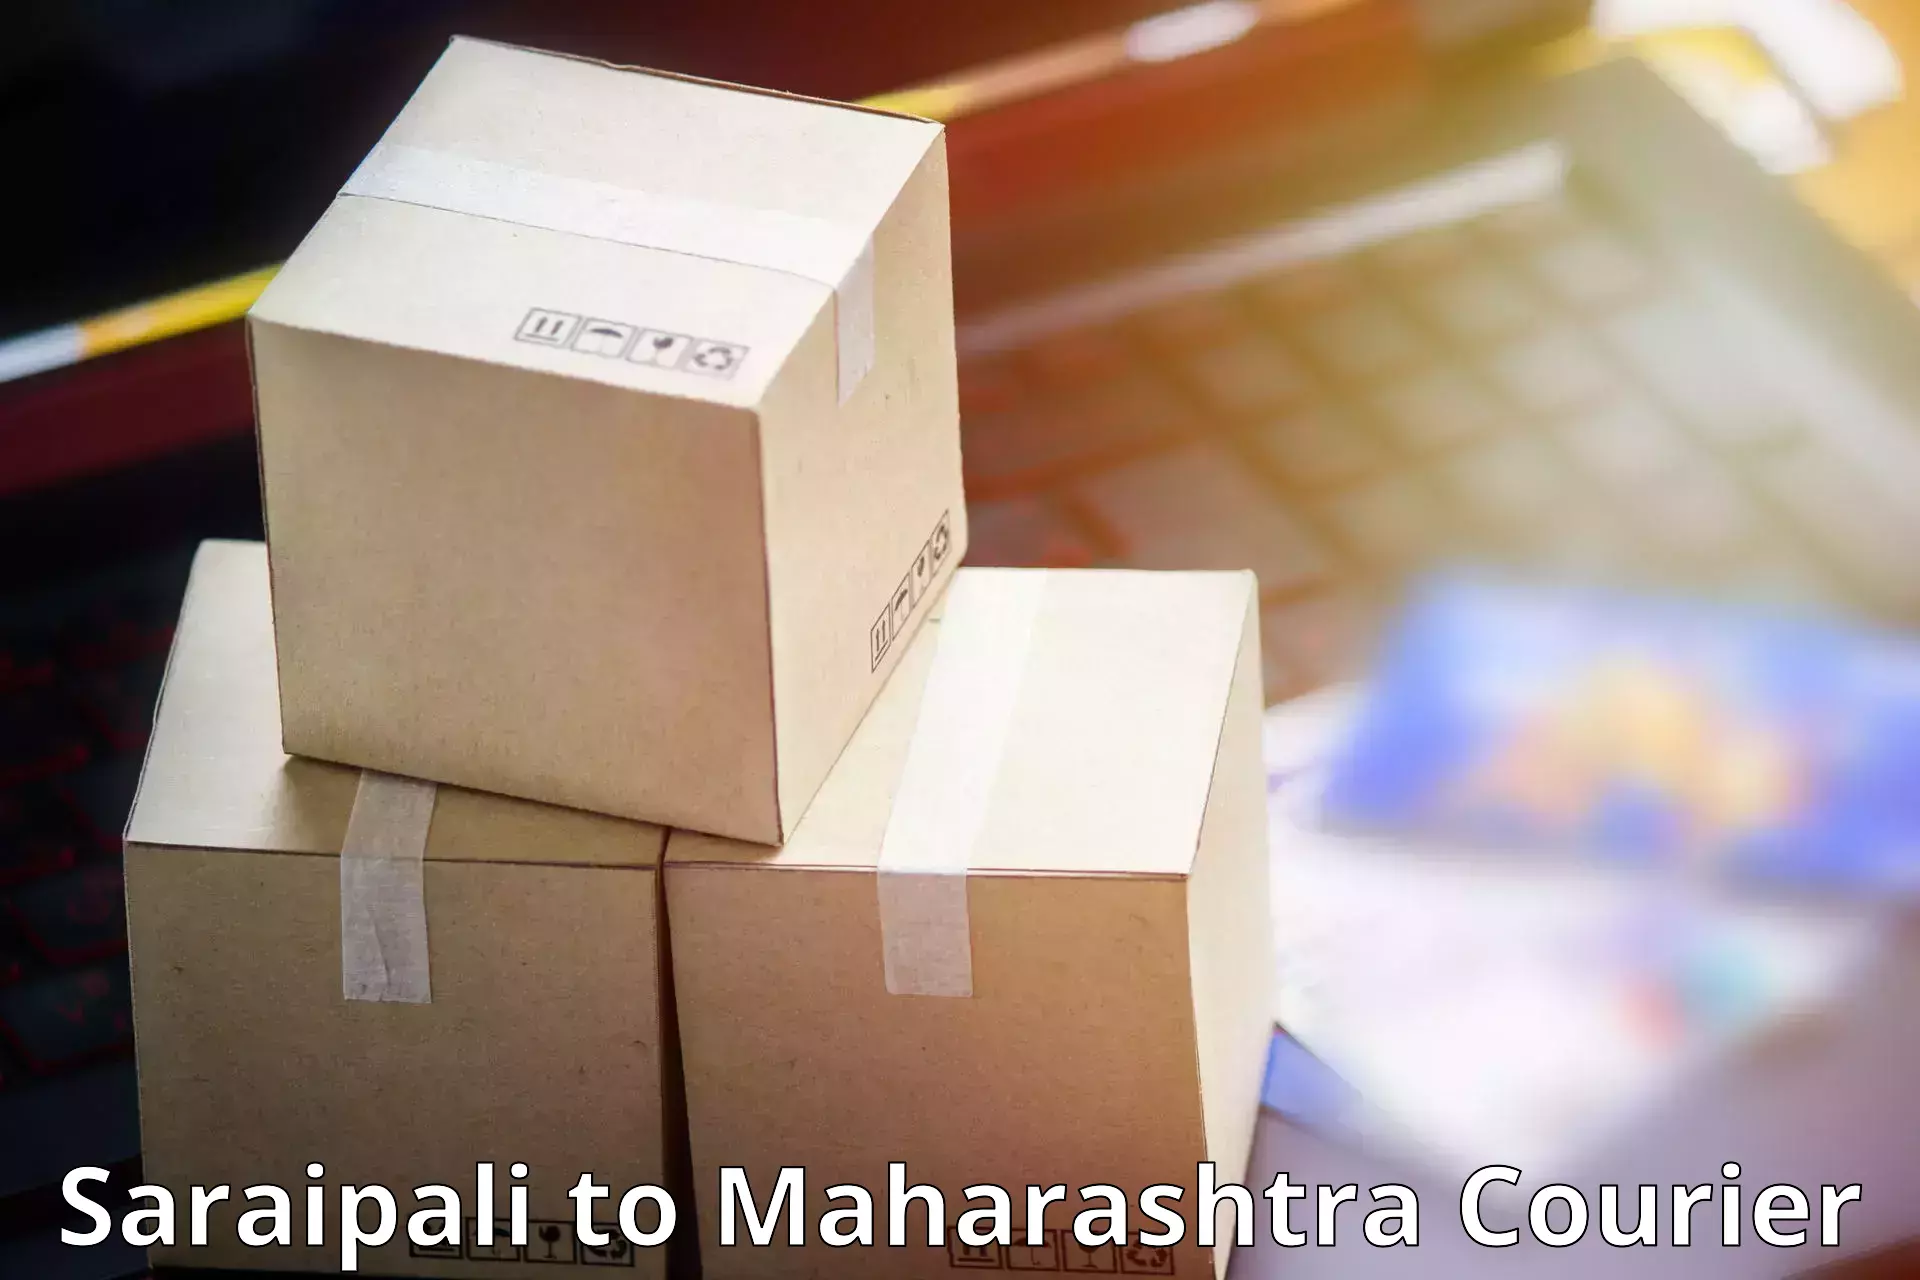 Next-day delivery options Saraipali to Dhule